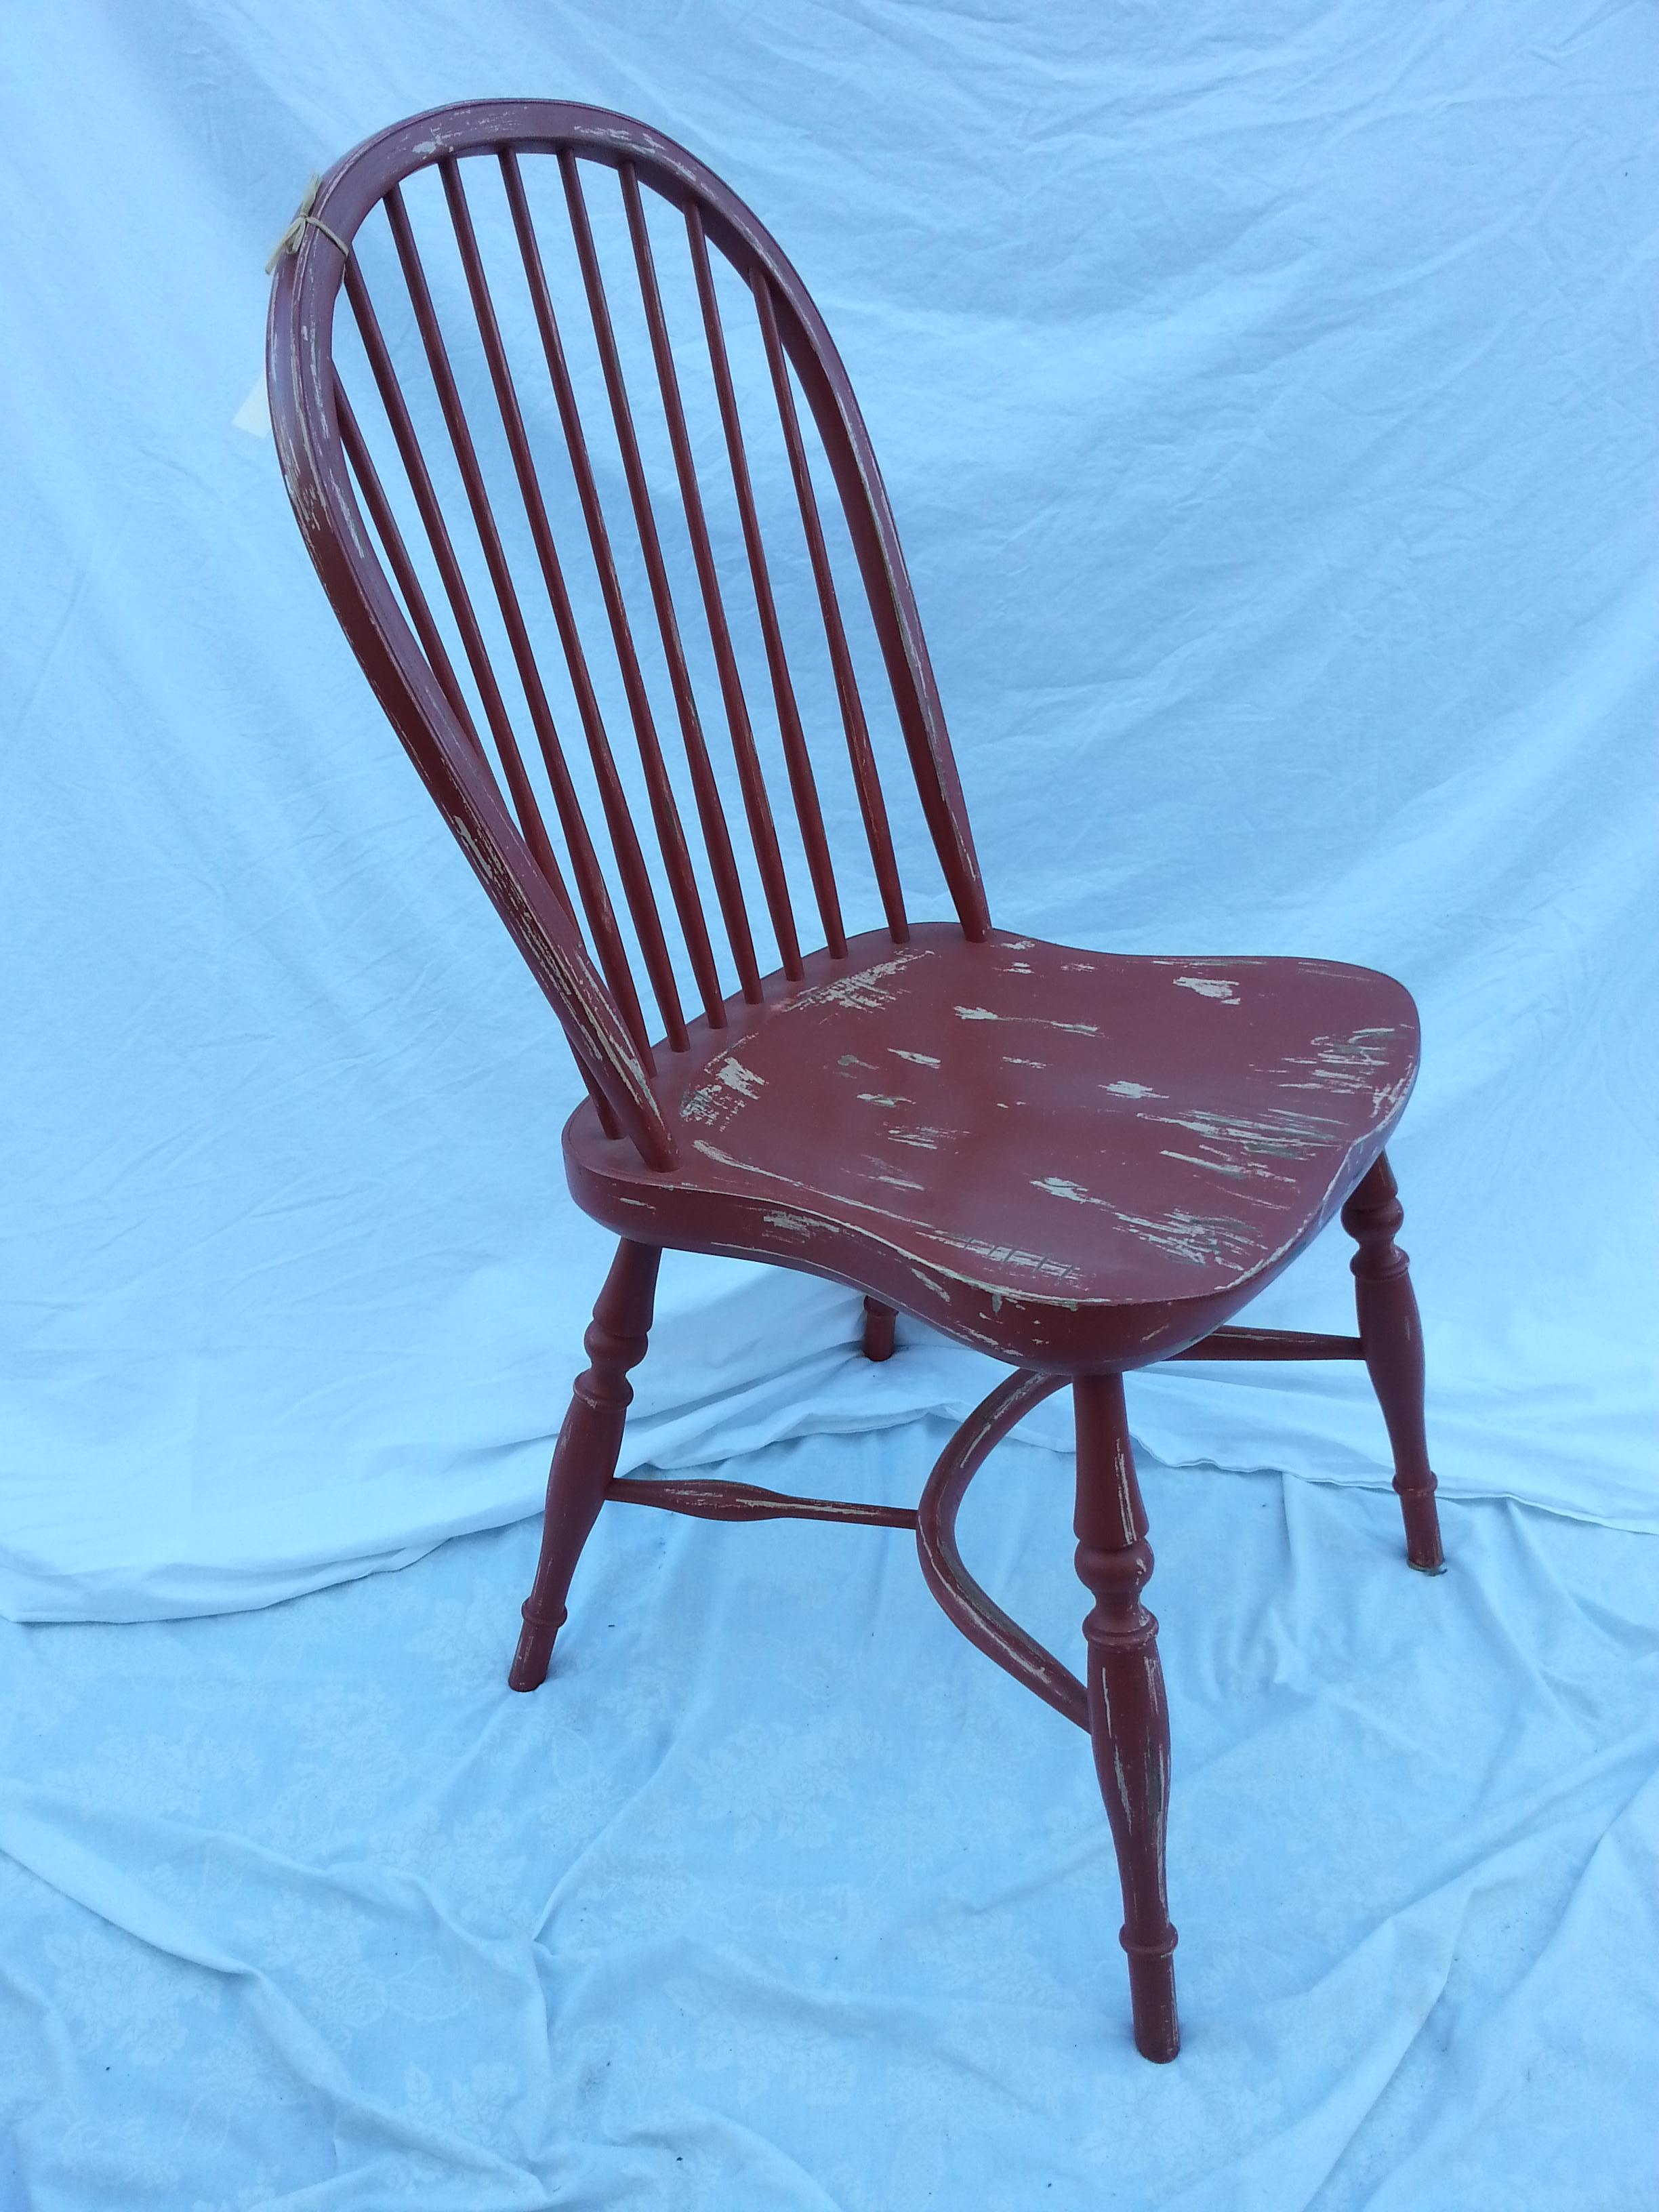 Reproduction spindle back red side chair.